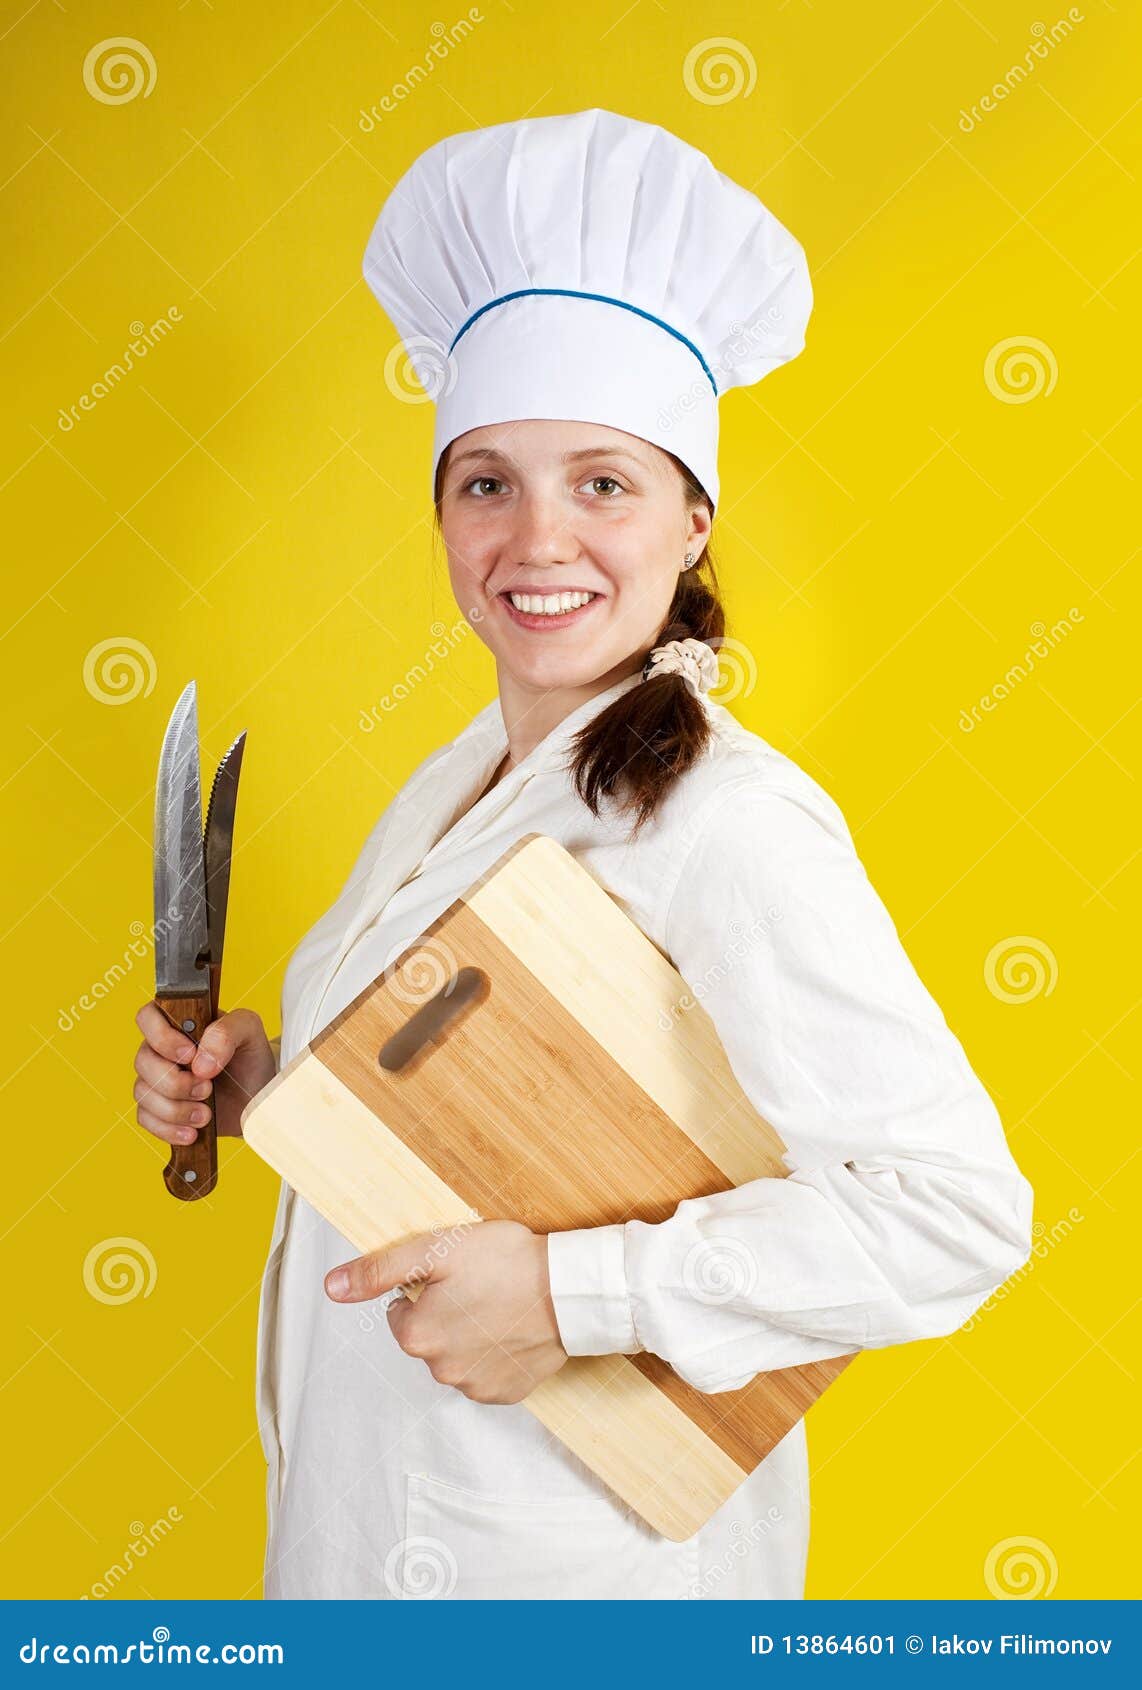 Female cook stock image. Image of board, knife, knives - 13864601